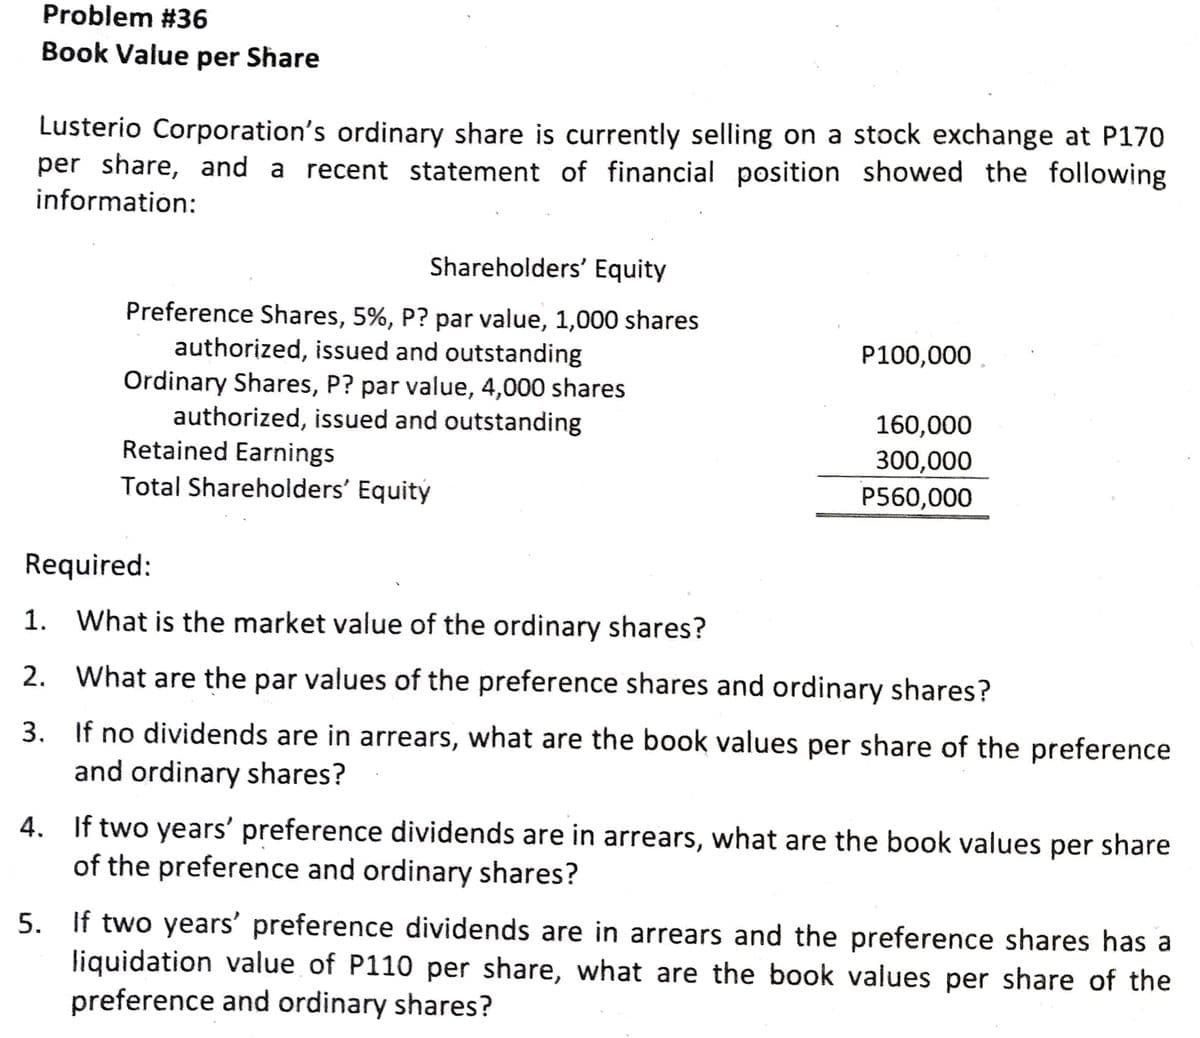 Problem #36
Book Value per Share
Lusterio Corporation's ordinary share is currently selling on a stock exchange at P170
per share, and a recent statement of financial position showed the following
information:
Shareholders' Equity
Preference Shares, 5%, P? par value, 1,000 shares
authorized, issued and outstanding
Ordinary Shares, P? par value, 4,000 shares
authorized, issued and outstanding
Retained Earnings
Total Shareholders' Equity
P100,000
160,000
300,000
P560,000
Required:
1.
What is the market value of the ordinary shares?
2. What are the par values of the preference shares and ordinary shares?
3. If no dividends are in arrears, what are the book values per share of the preference
and ordinary shares?
4. If two years' preference dividends are in arrears, what are the book values per share
of the preference and ordinary shares?
5. If two years' preference dividends are in arrears and the preference shares has a
liquidation value of P110 per share, what are the book values per share of the
preference and ordinary shares?
